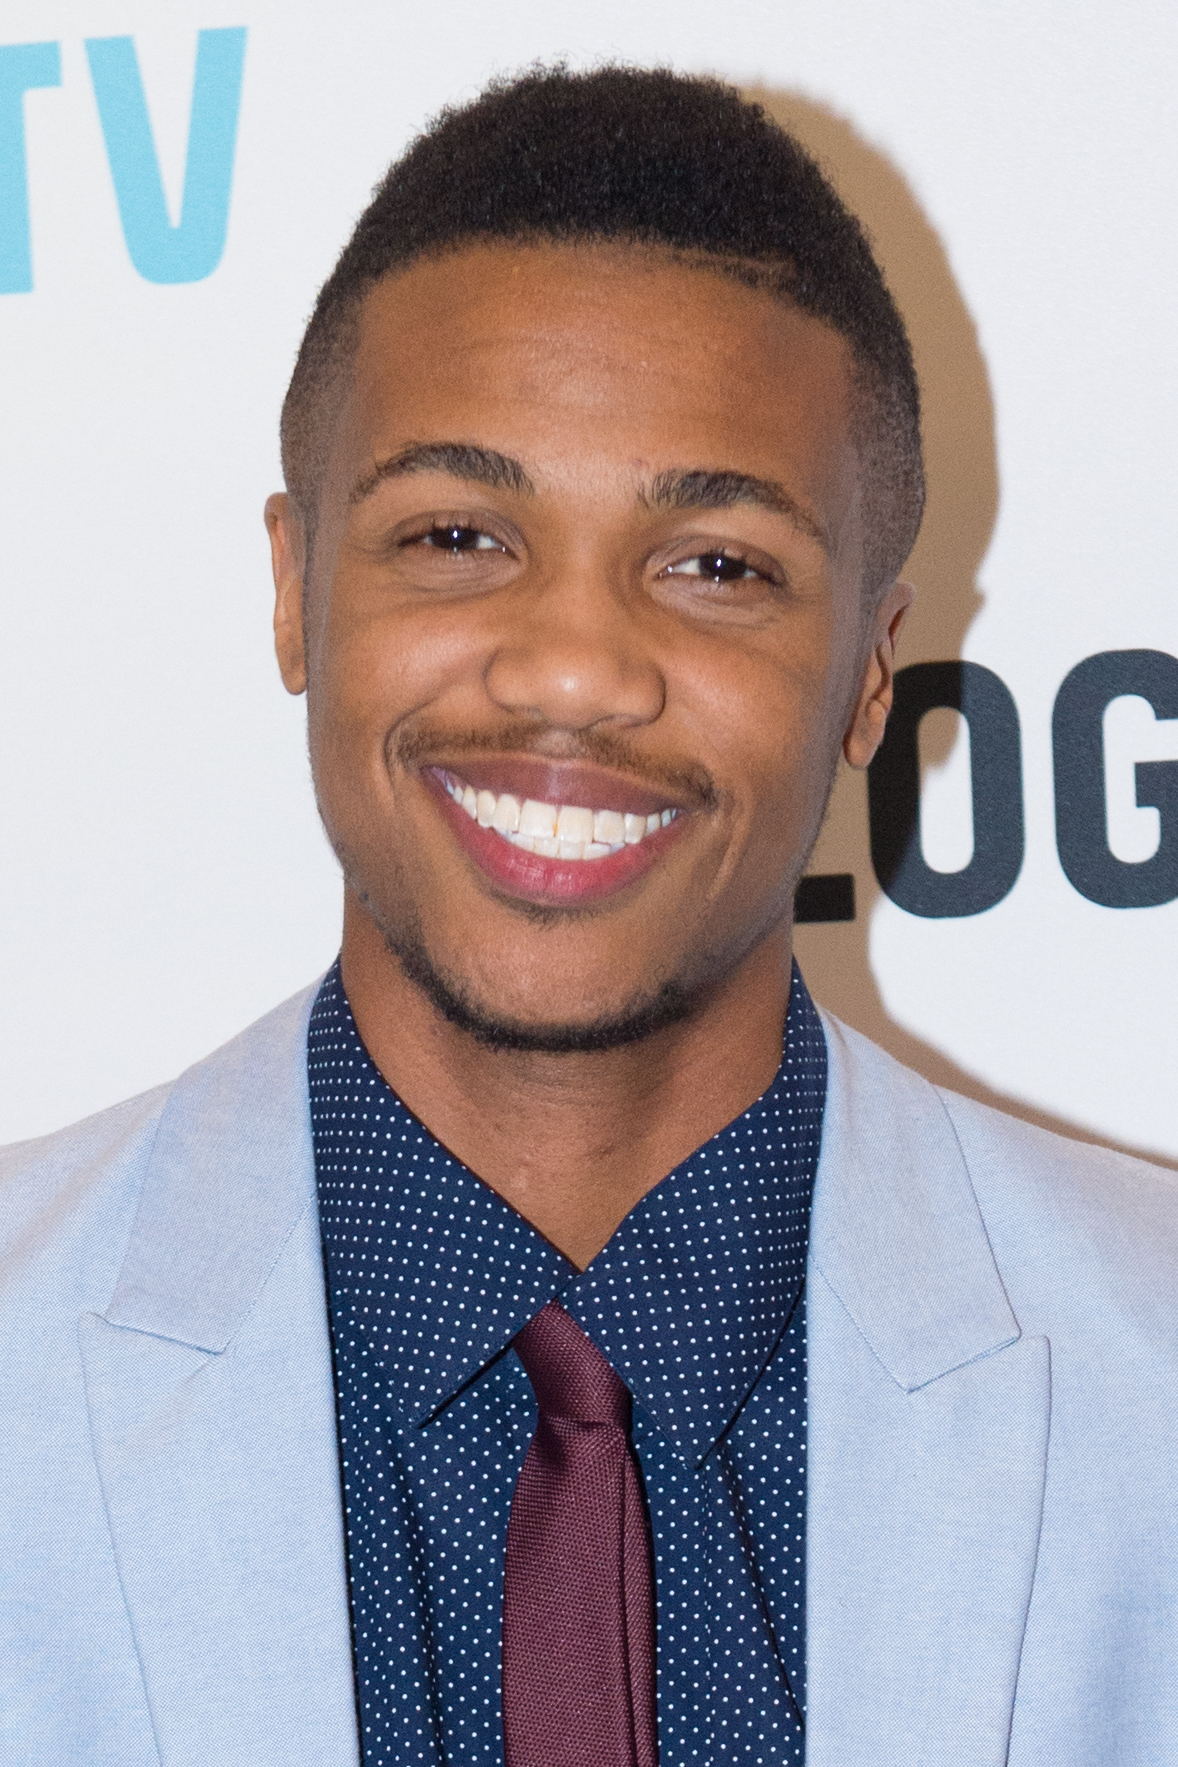 Kye Allums attends the premiere screening of the MTV and Logo TV documentary "Laverne Cox Presents: The T Word" at the Paramount Screening Room on Thursday, Oct. 16, 2014, in New York. (Scott Roth/Invision/AP)